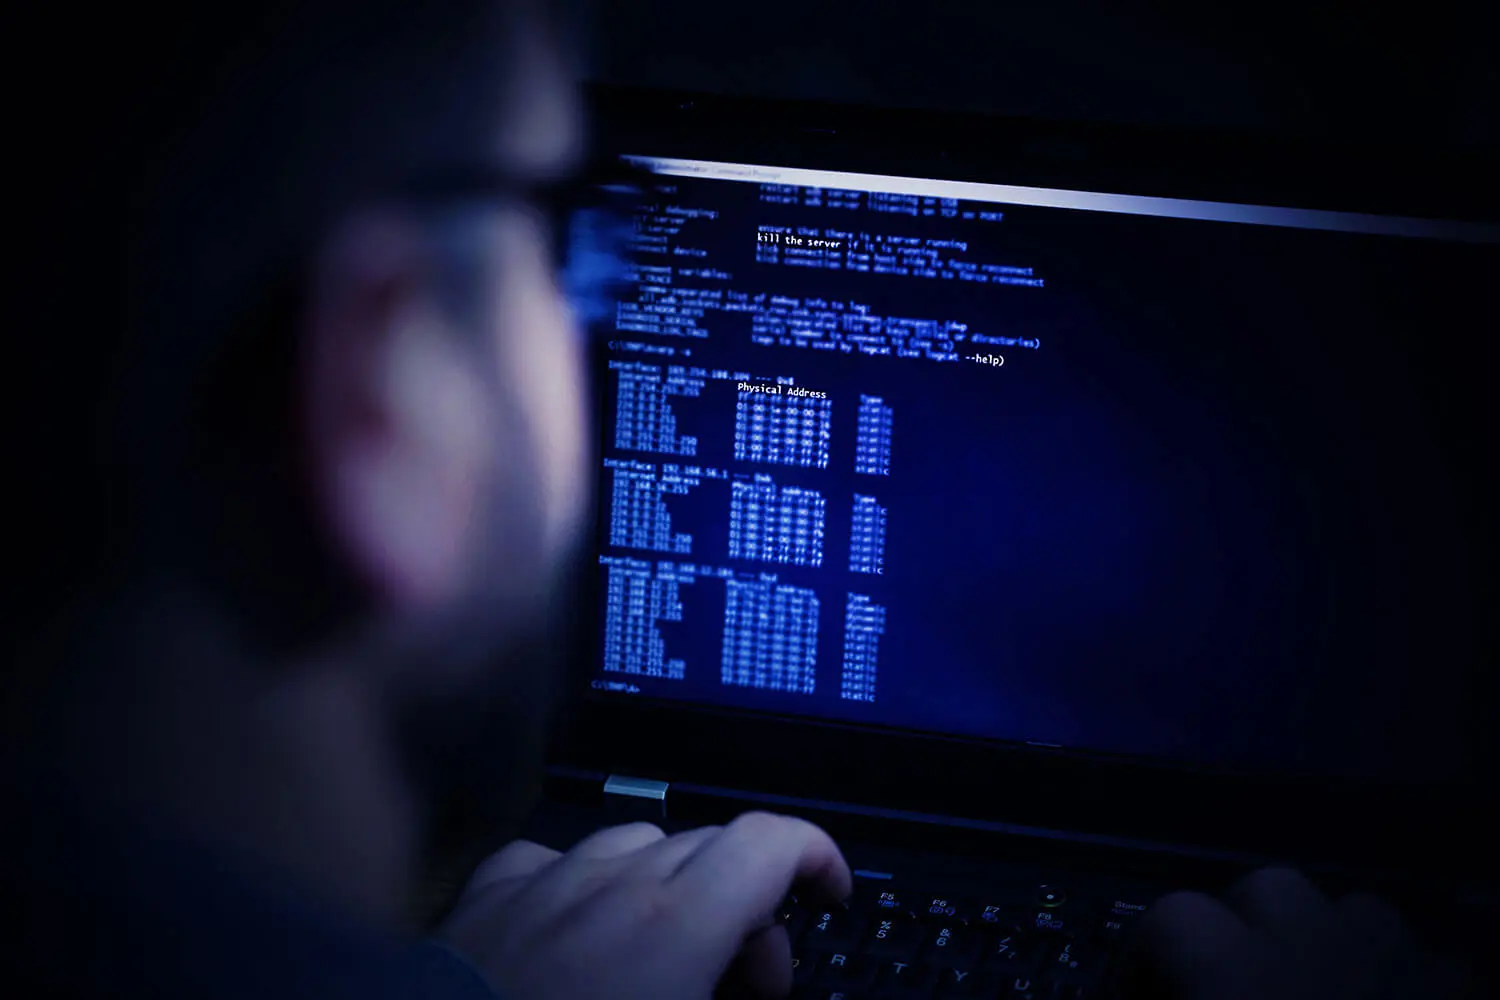 An image showing a man involved in computer hacking.